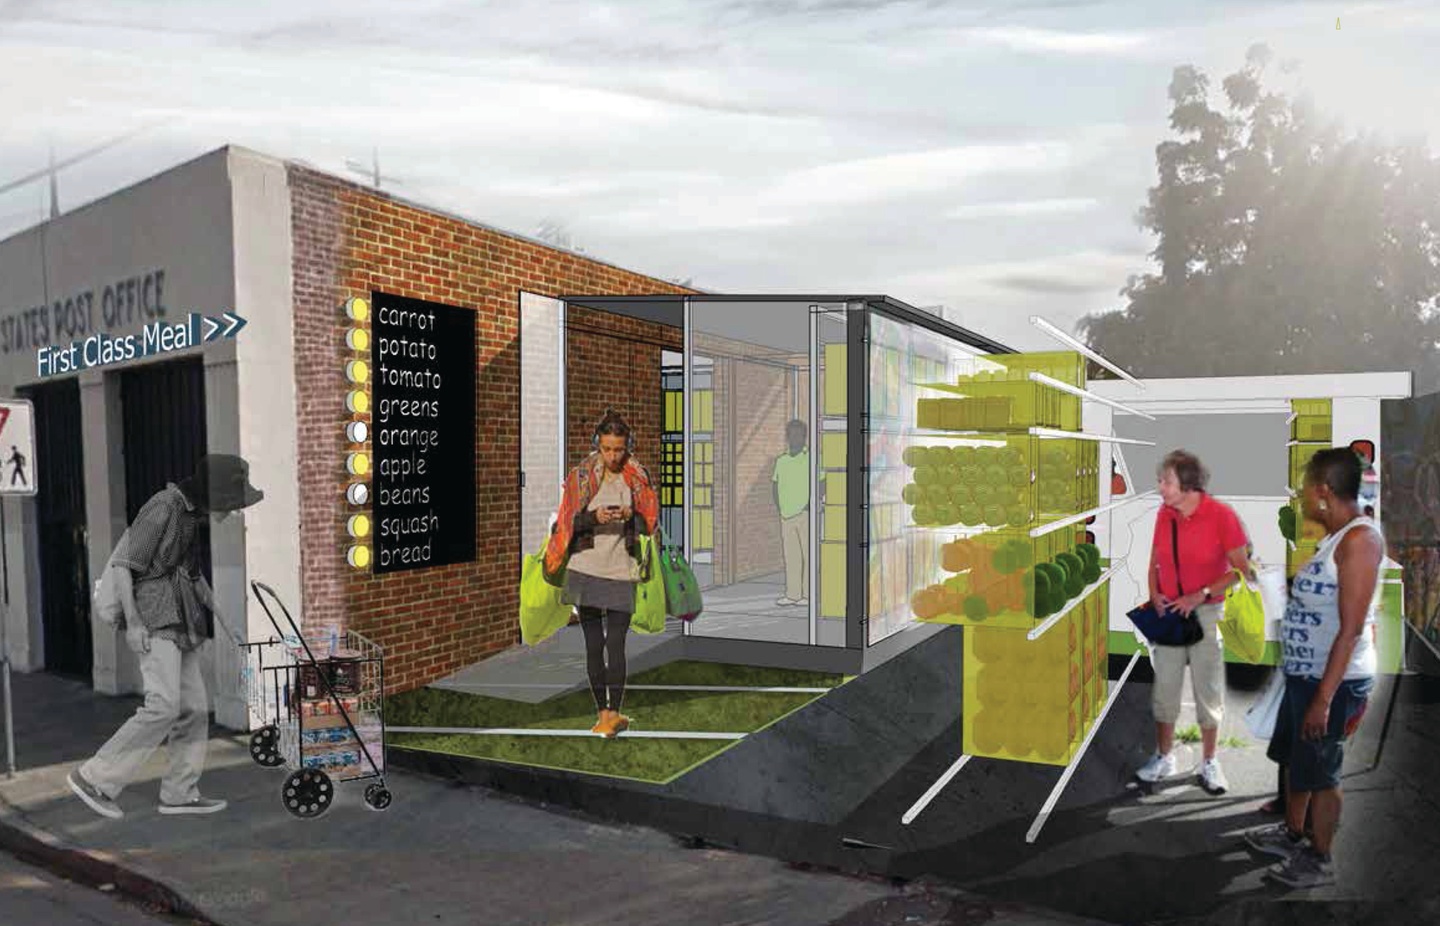 A collage render of a food mart and grocer stand with various items listed on side of existing building